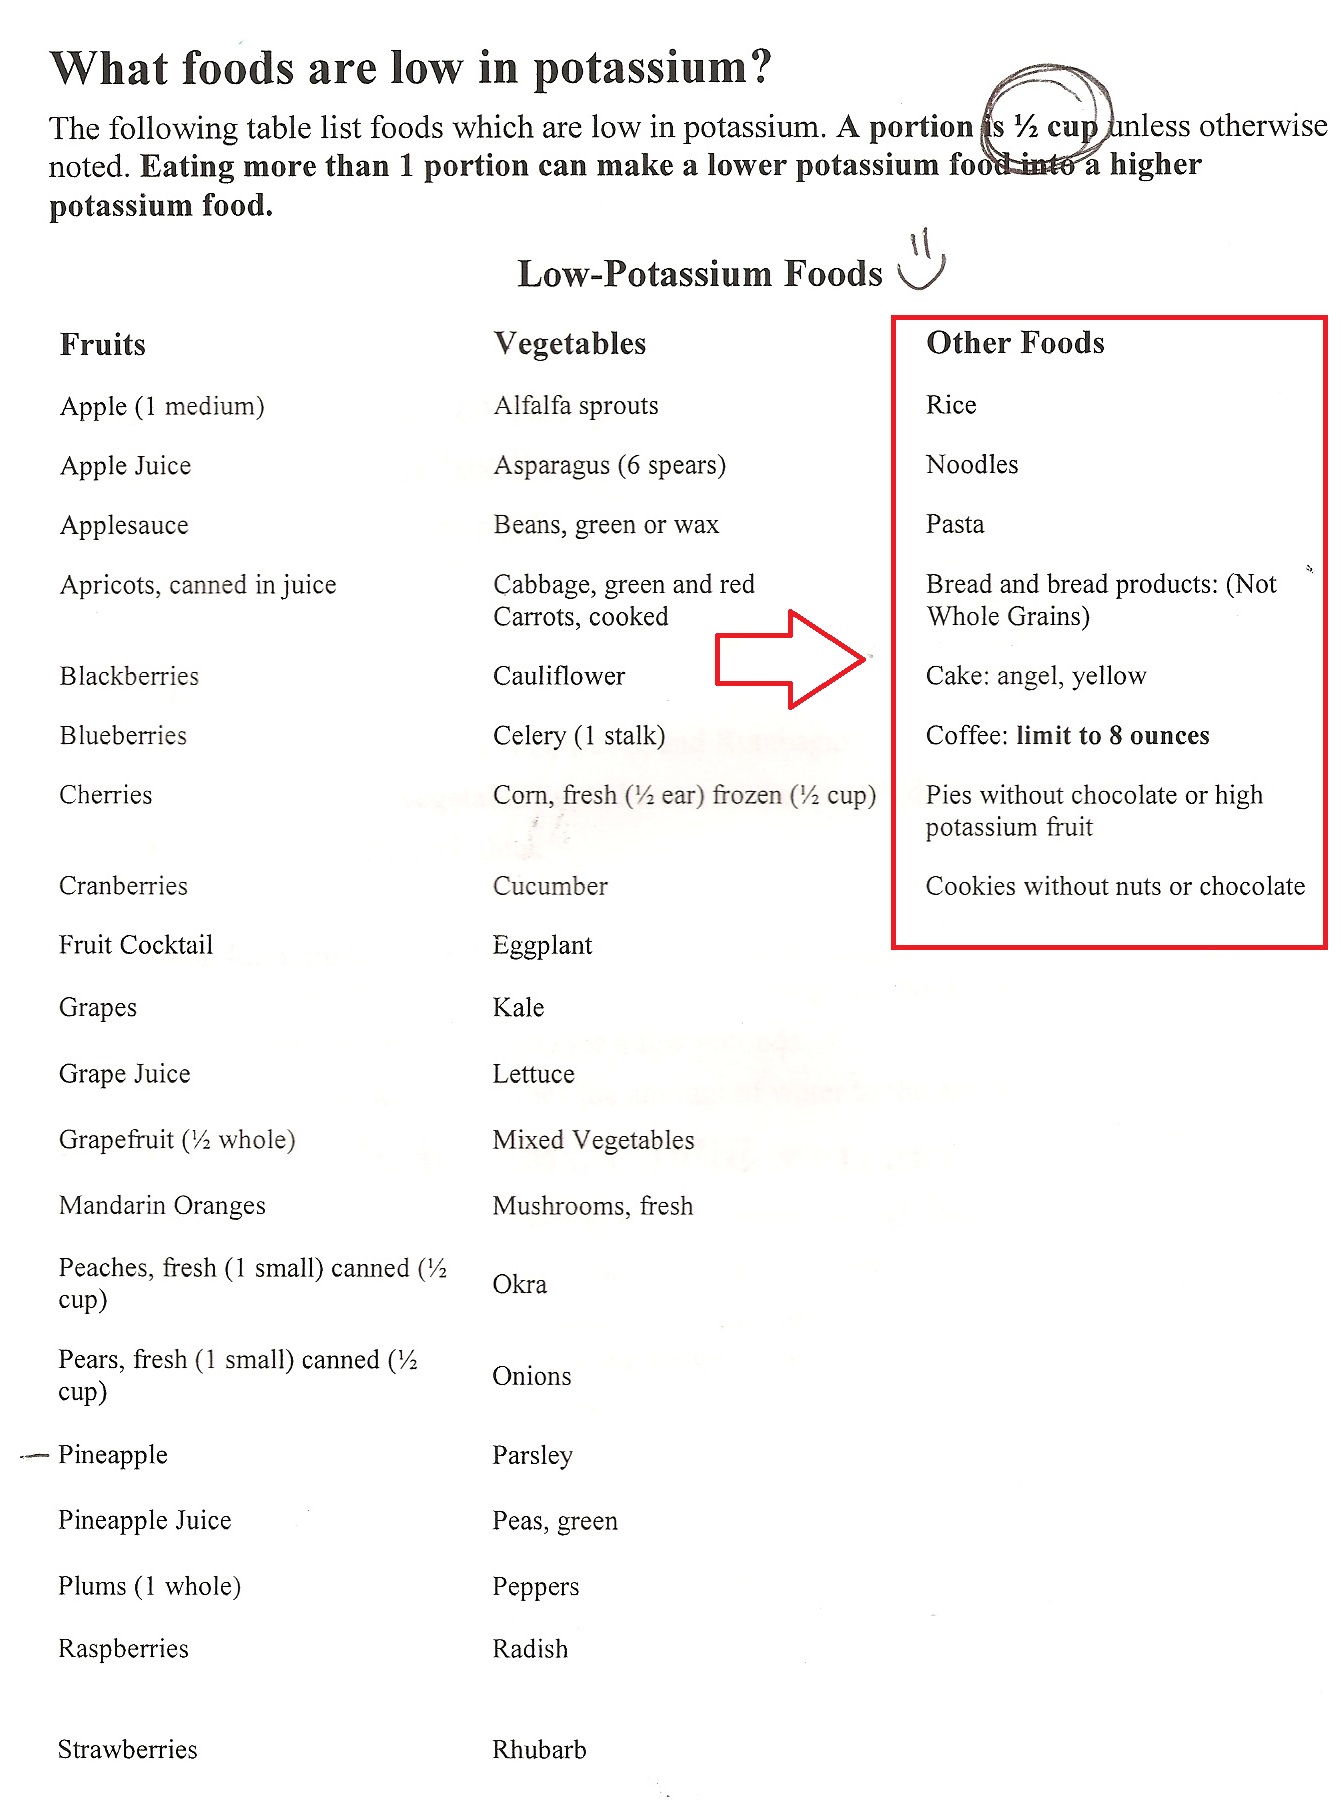 What is a list of foods for a low-potassium diet?